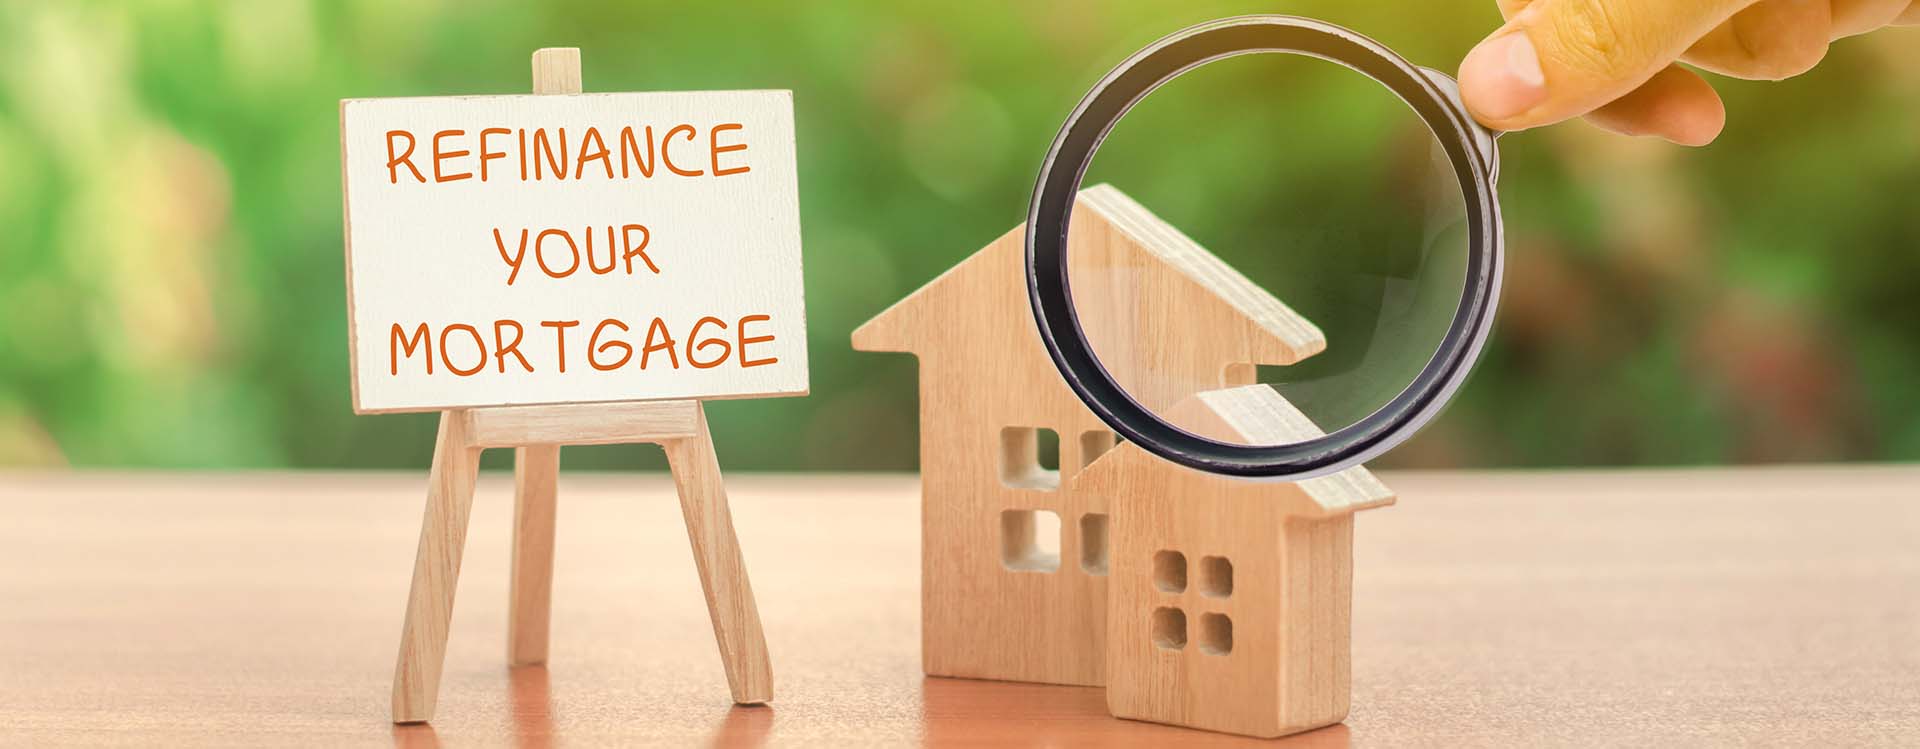 Top 3 Reasons to Refinance Your Mortgage